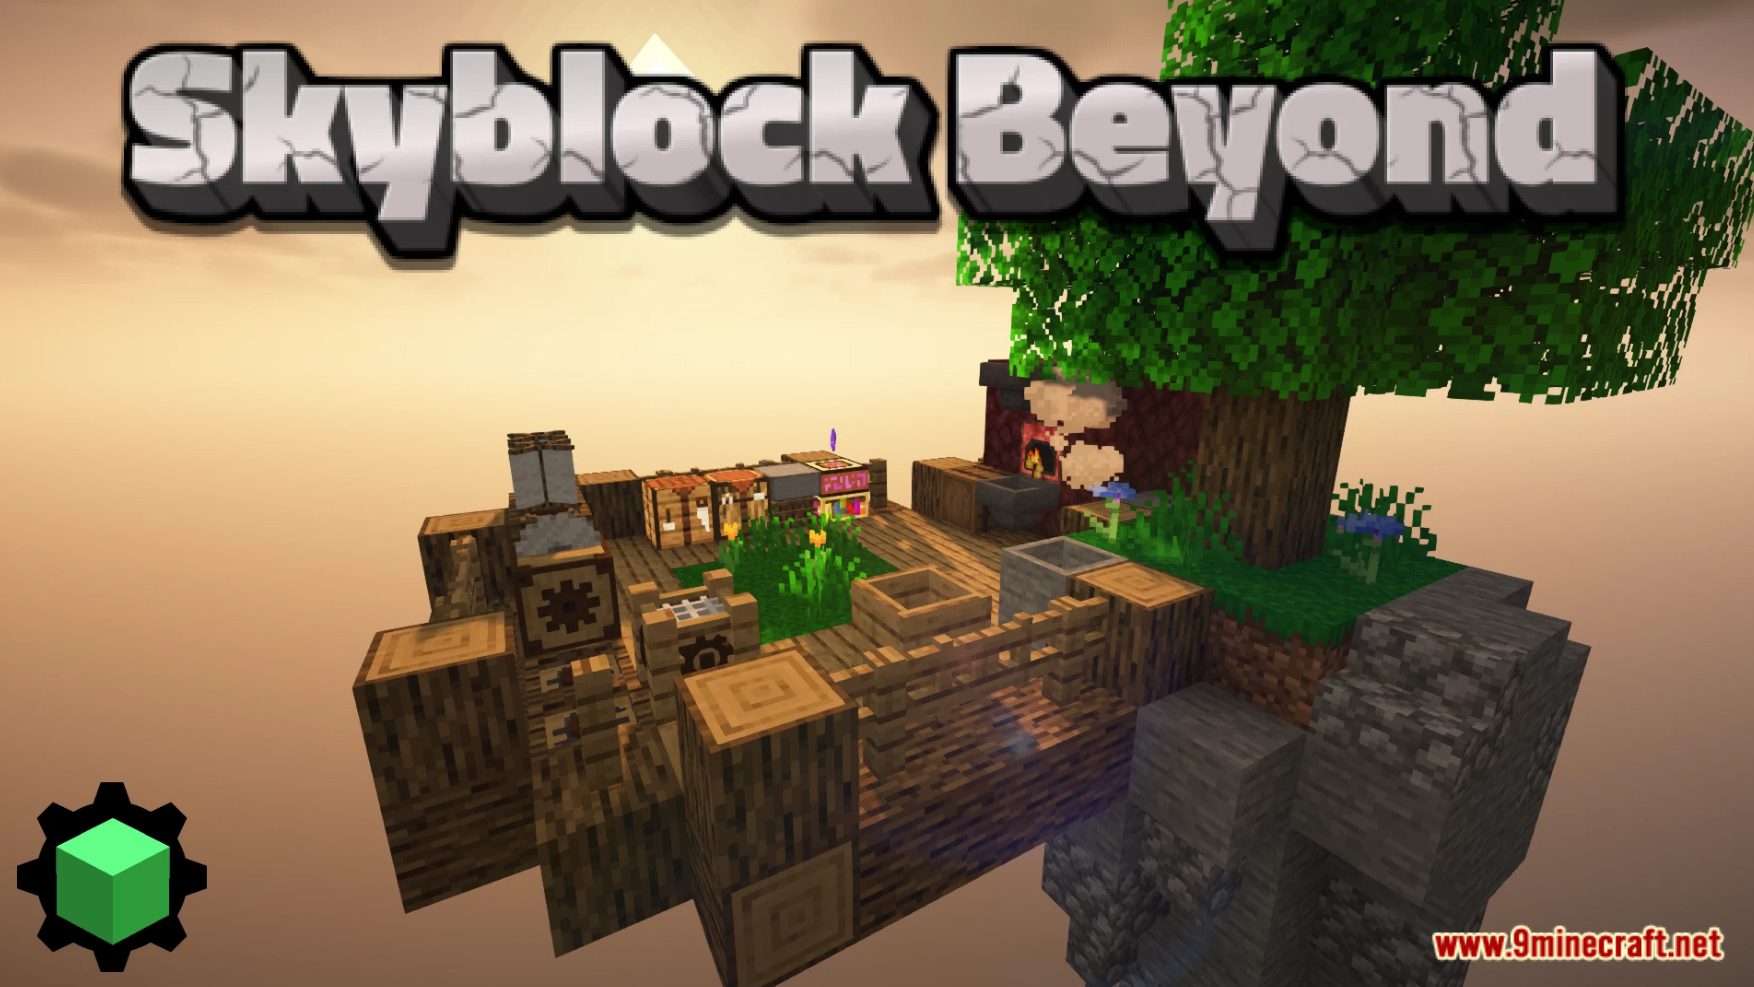 Skyblock+ Data Pack (1.19.4, 1.19.2) - Skyblock Expansions! 2